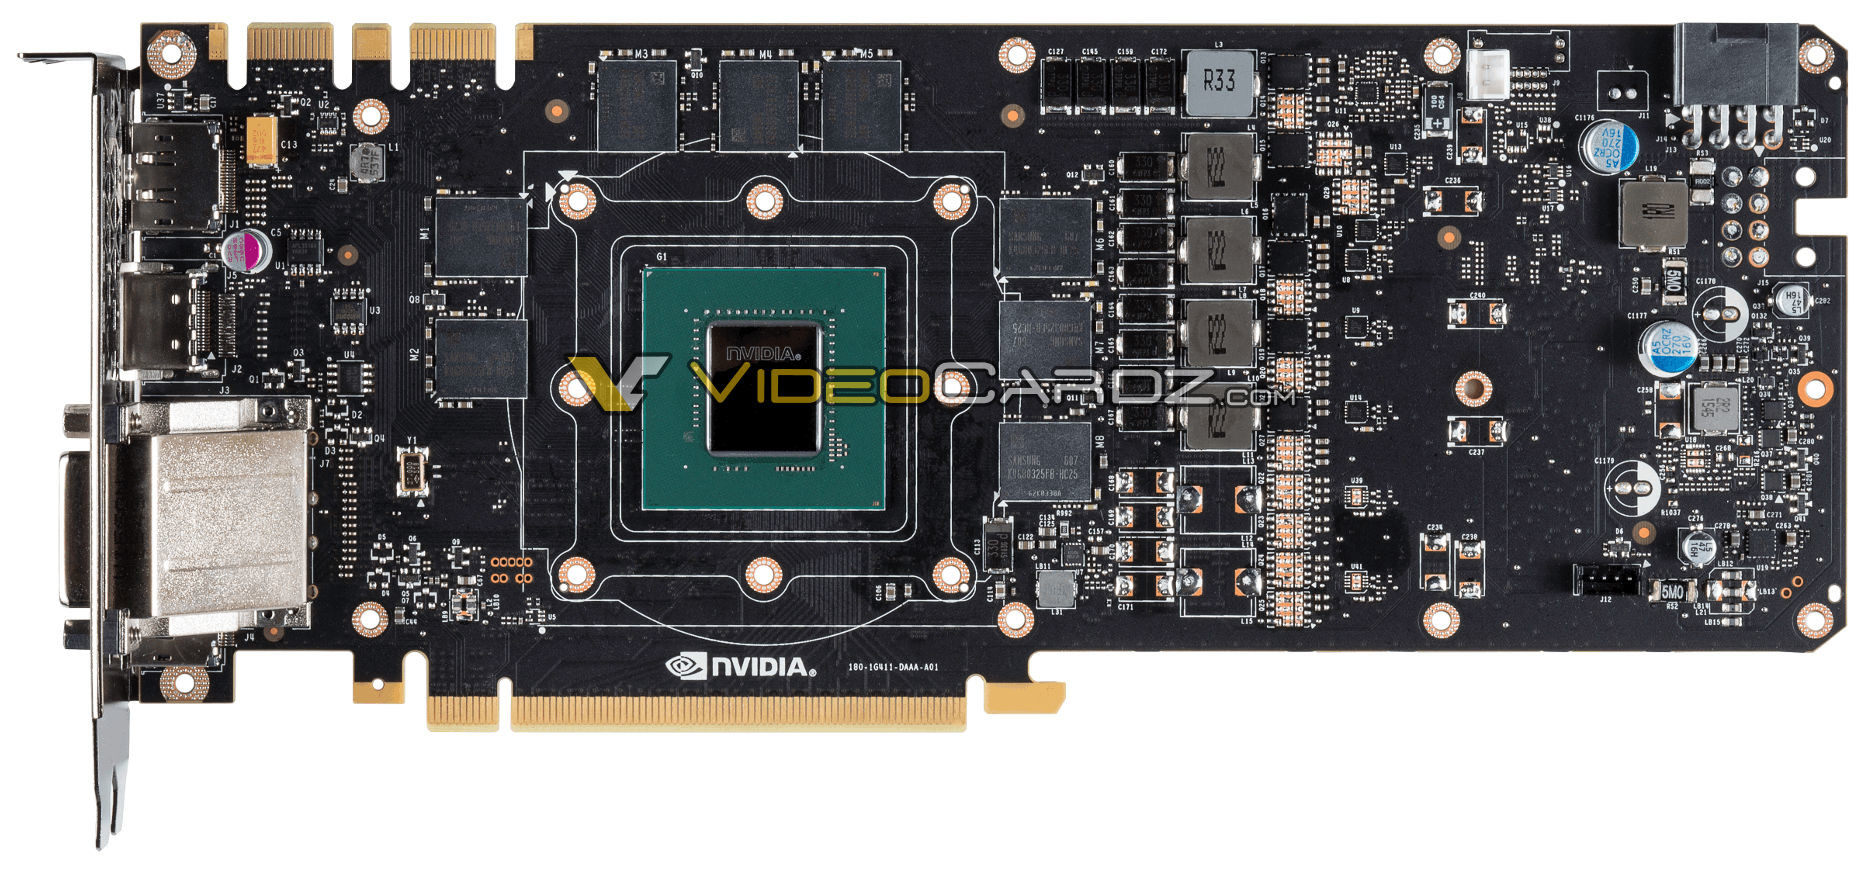 Media asset in full size related to 3dfxzone.it news item entitled as follows: Le differenze tra i PCB delle GeForce GTX 1070 e GTX 10780 reference | Image Name: news24330_NVIDIA-GeForce-GTX-1070-Reference-PCB_1.jpg